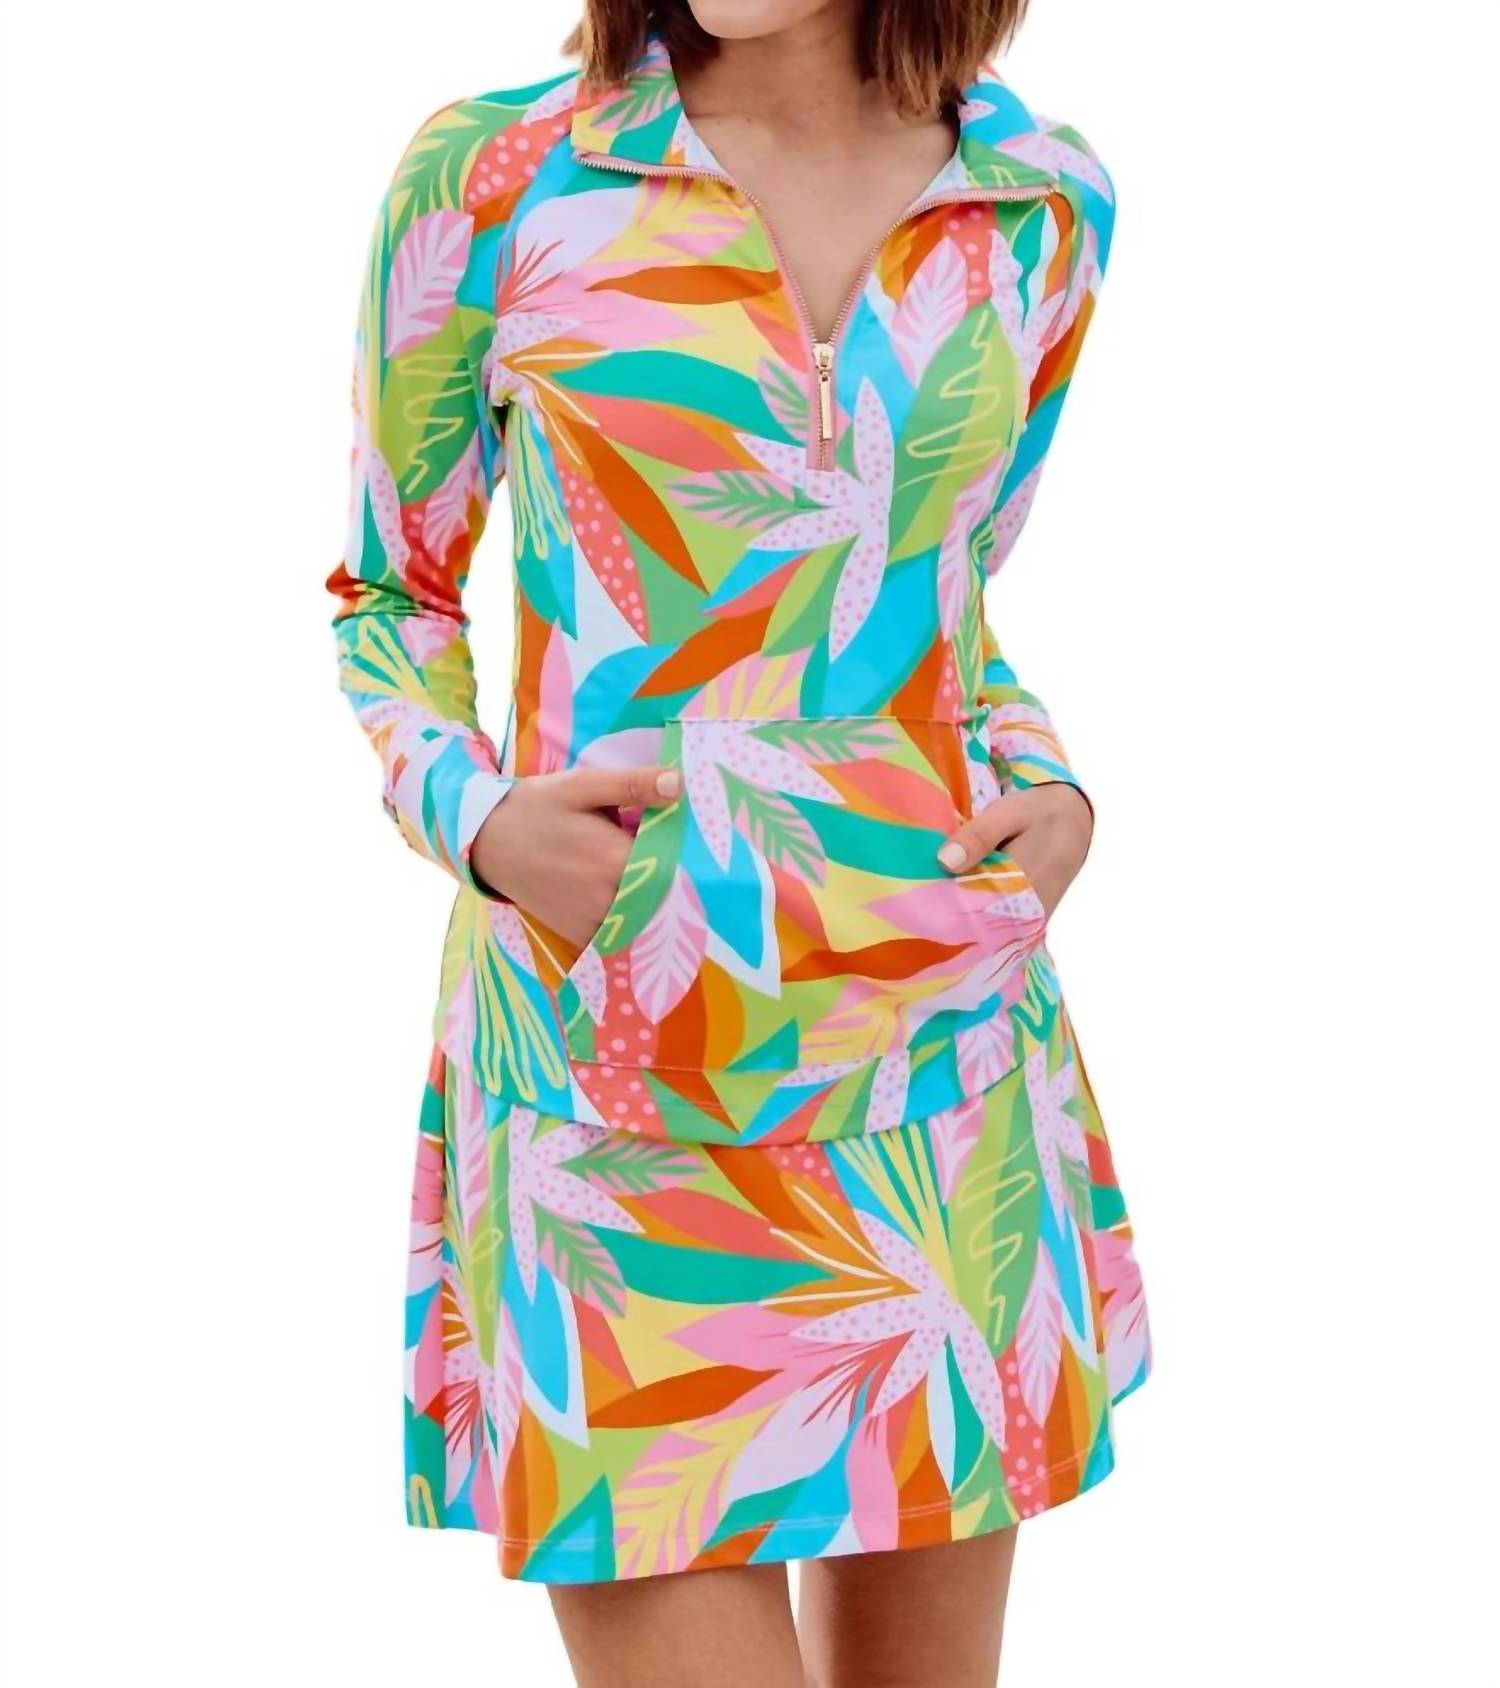 Mary Square Sport Half Zip Top In Get Tropical In Multi